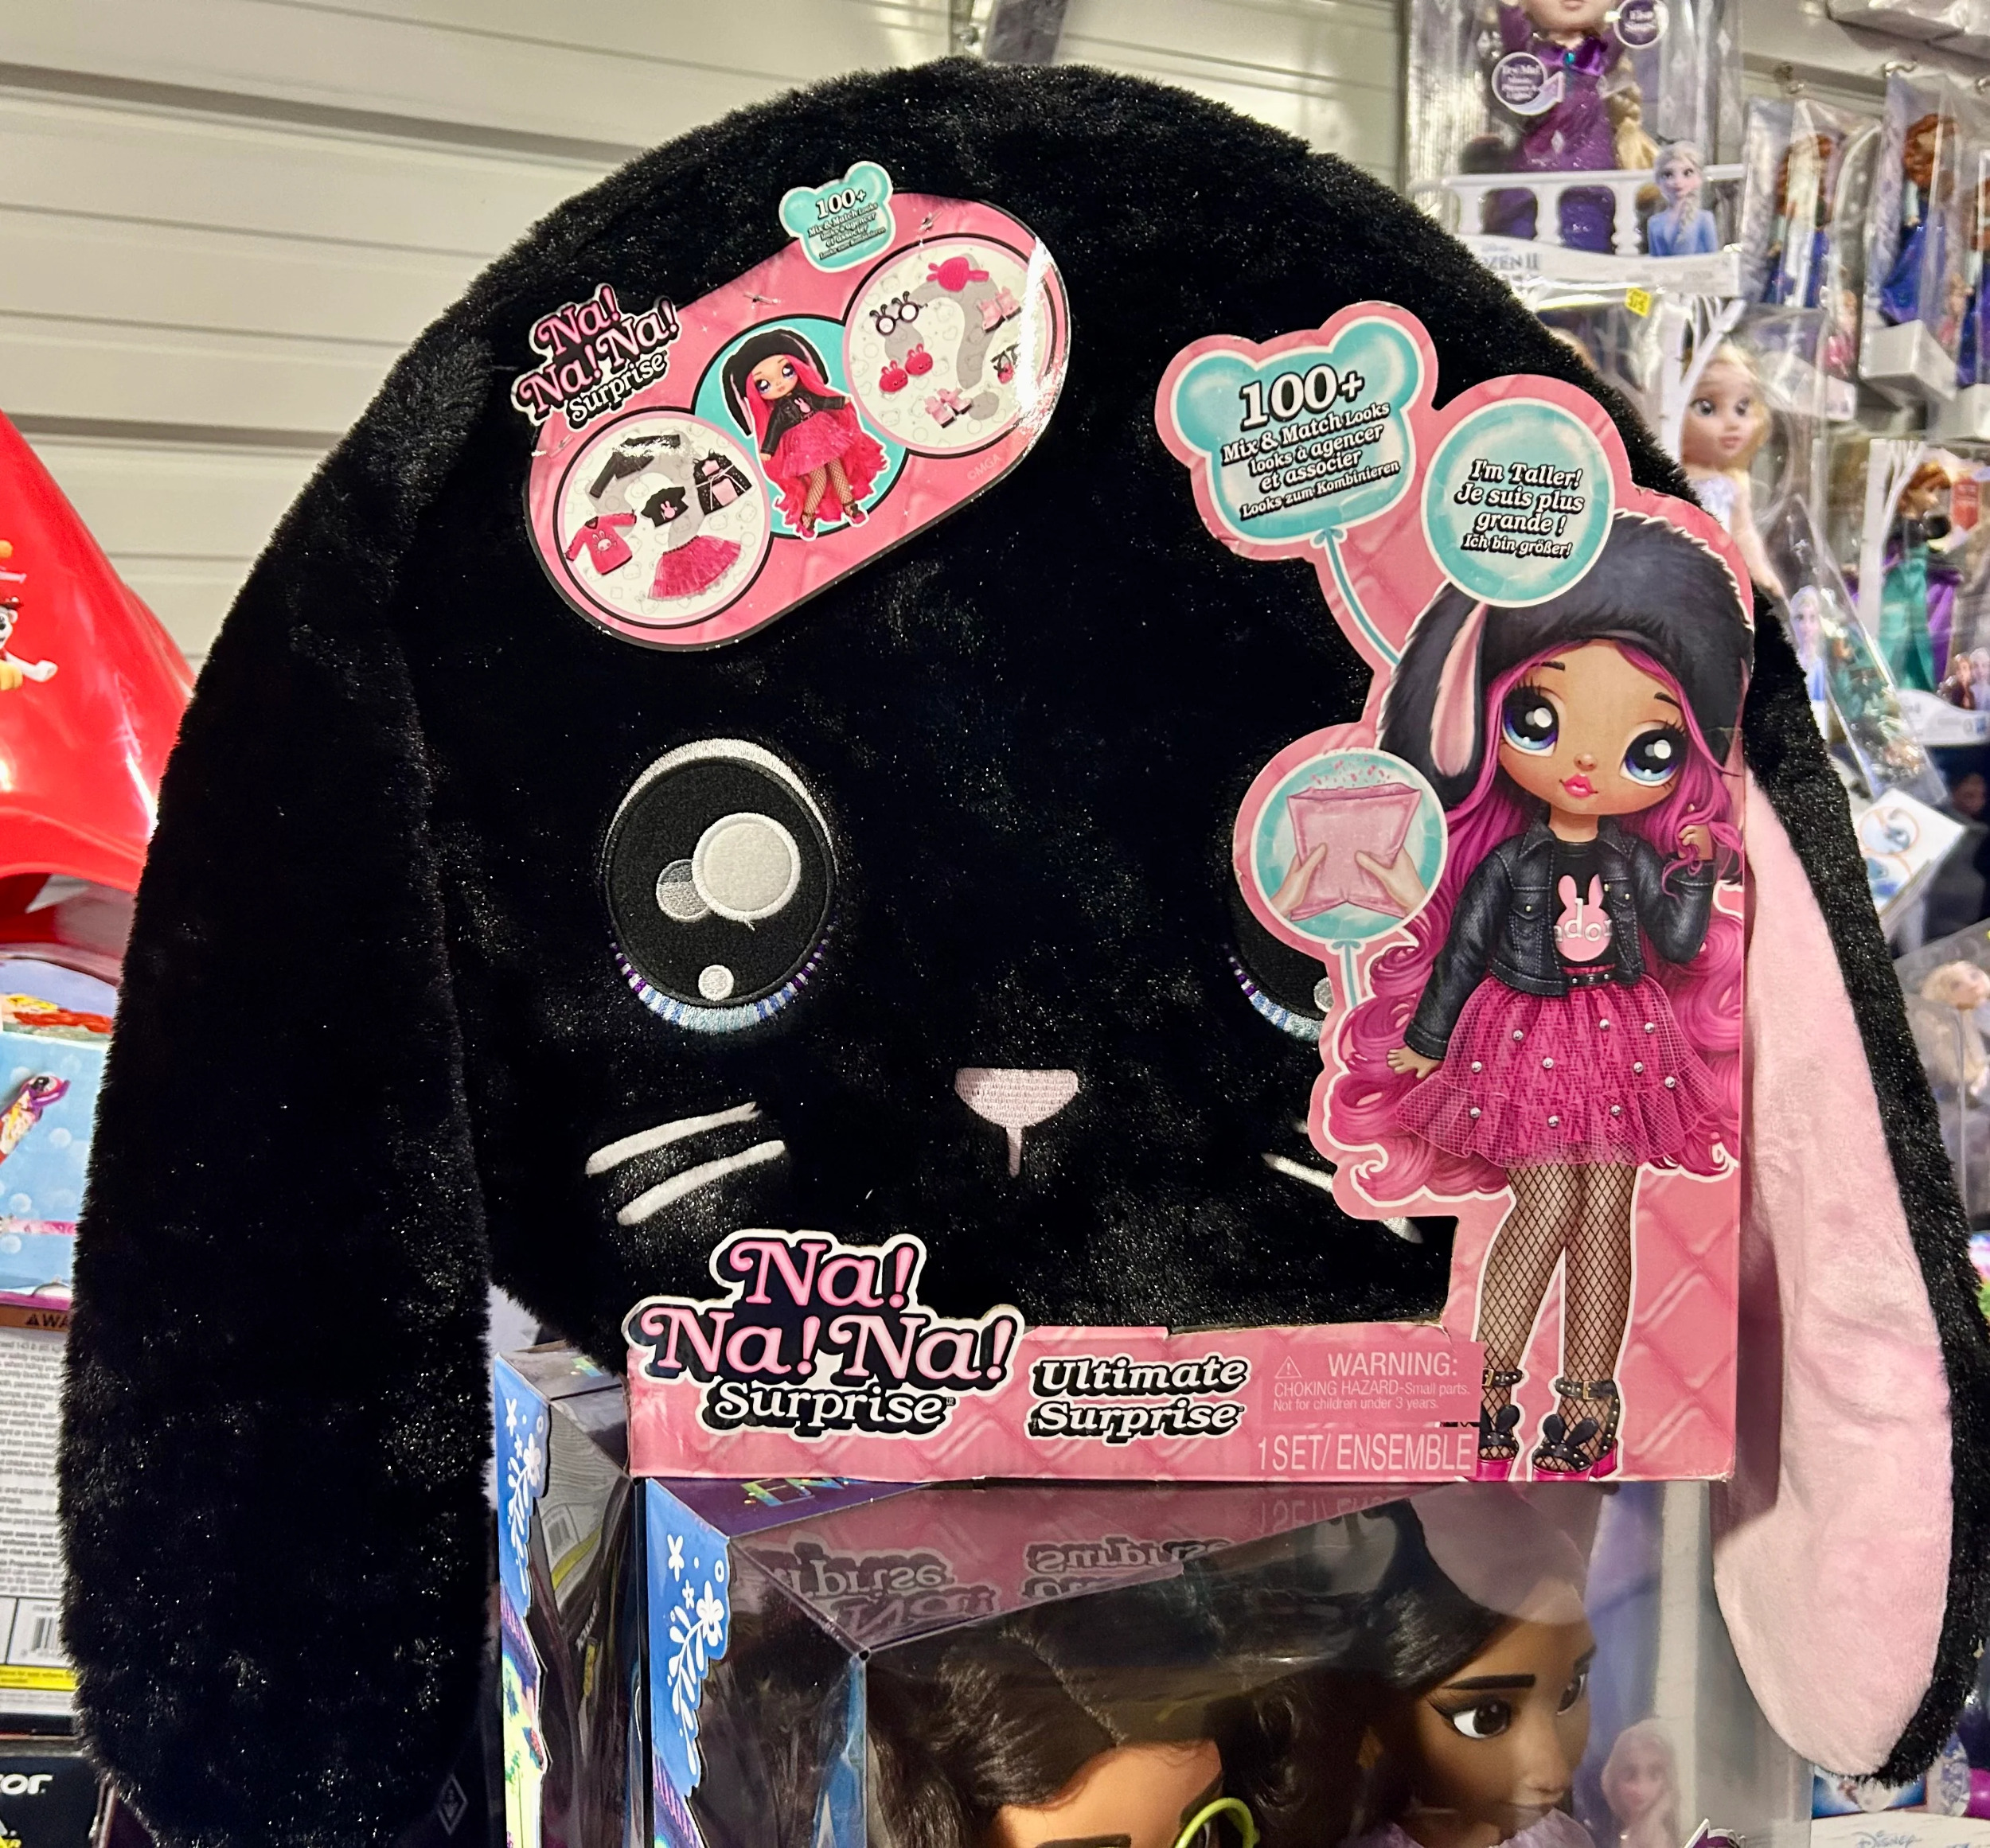 Na Na Na Surprise Ultimate Surprise Black Bunny Doll with 100+ Looks and Giant Bunny Tote, New Soft Poseable Doll with Fashion Accessories for 100+ Mix & Match Looks - image 1 of 4